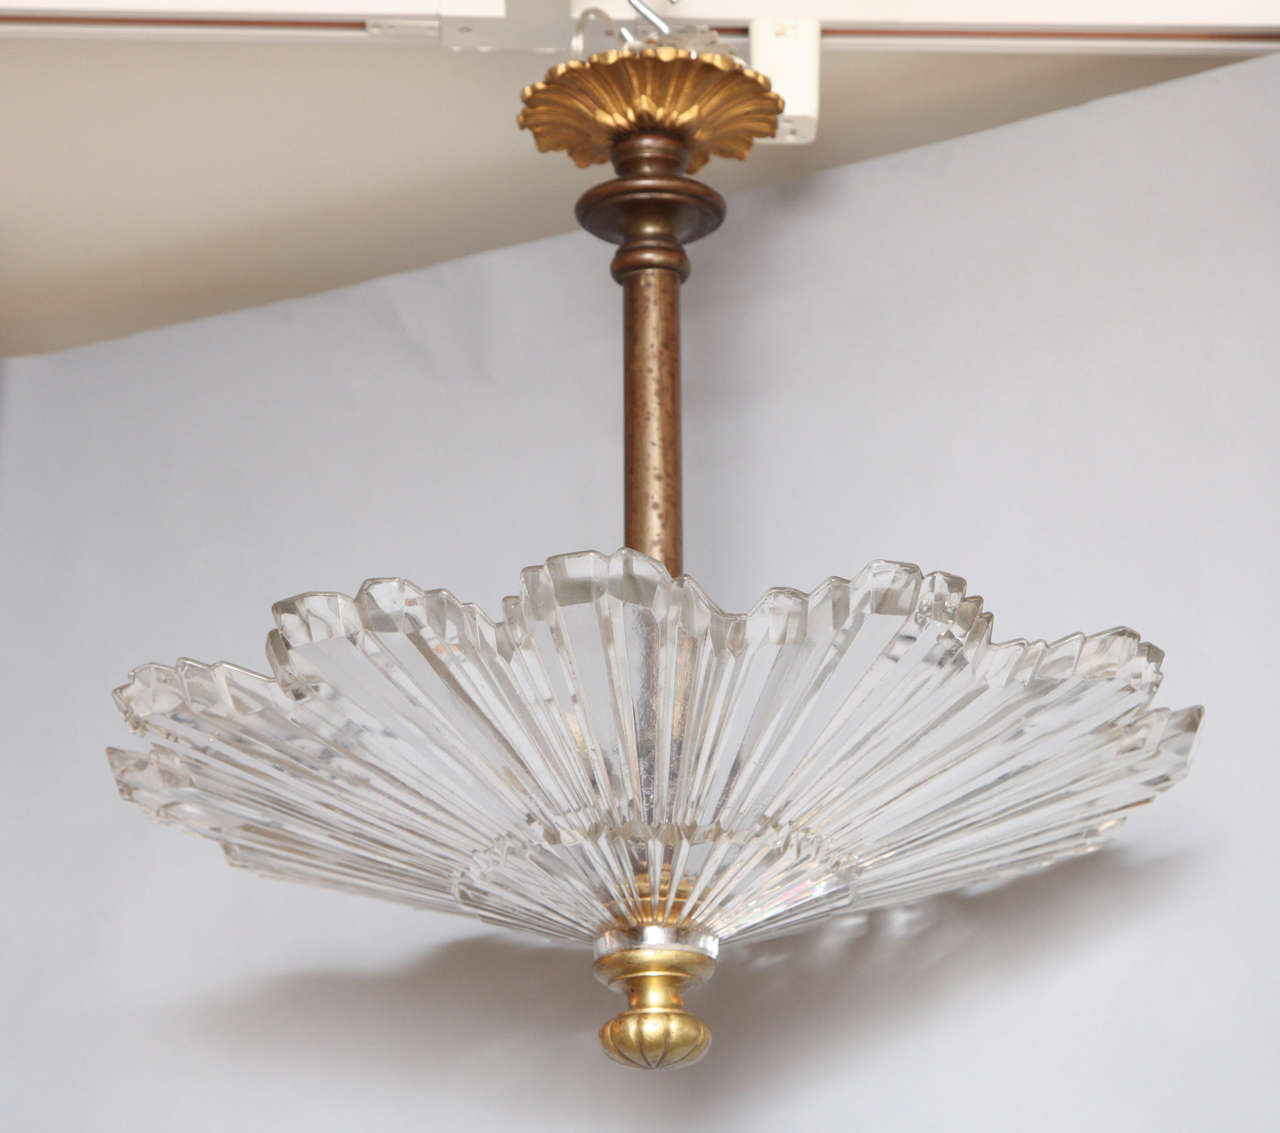 An American flush mount glass sunburst ceiling light with bronze rod, finial, and canopy.